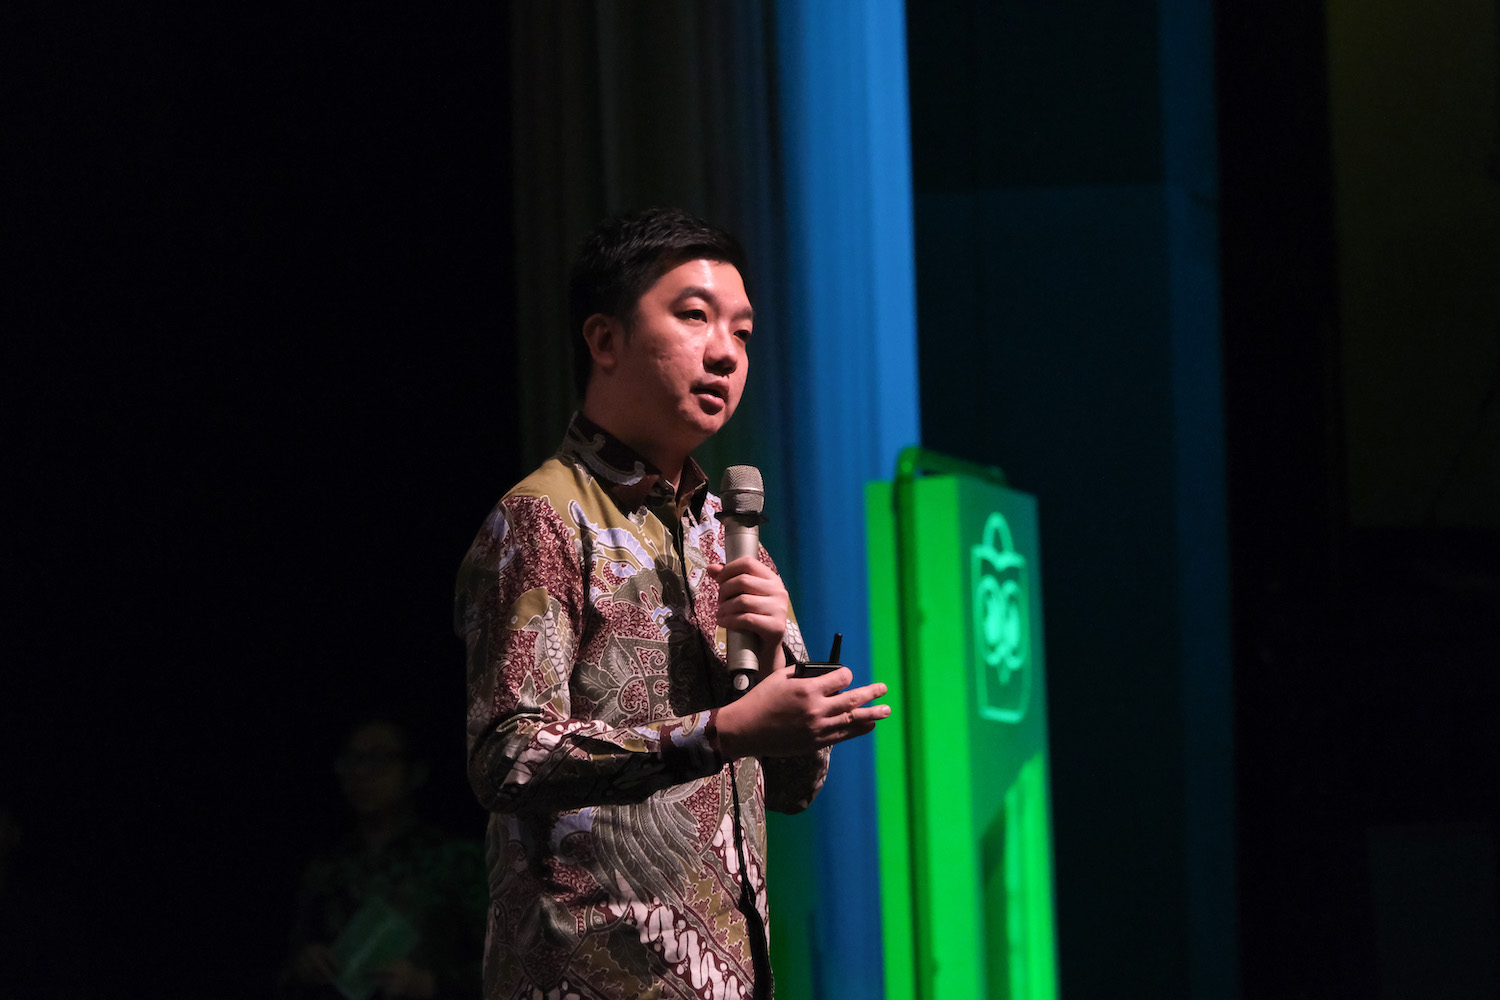 Tokopedia projects to contribute USD 12 billion to the Indonesian economy this year